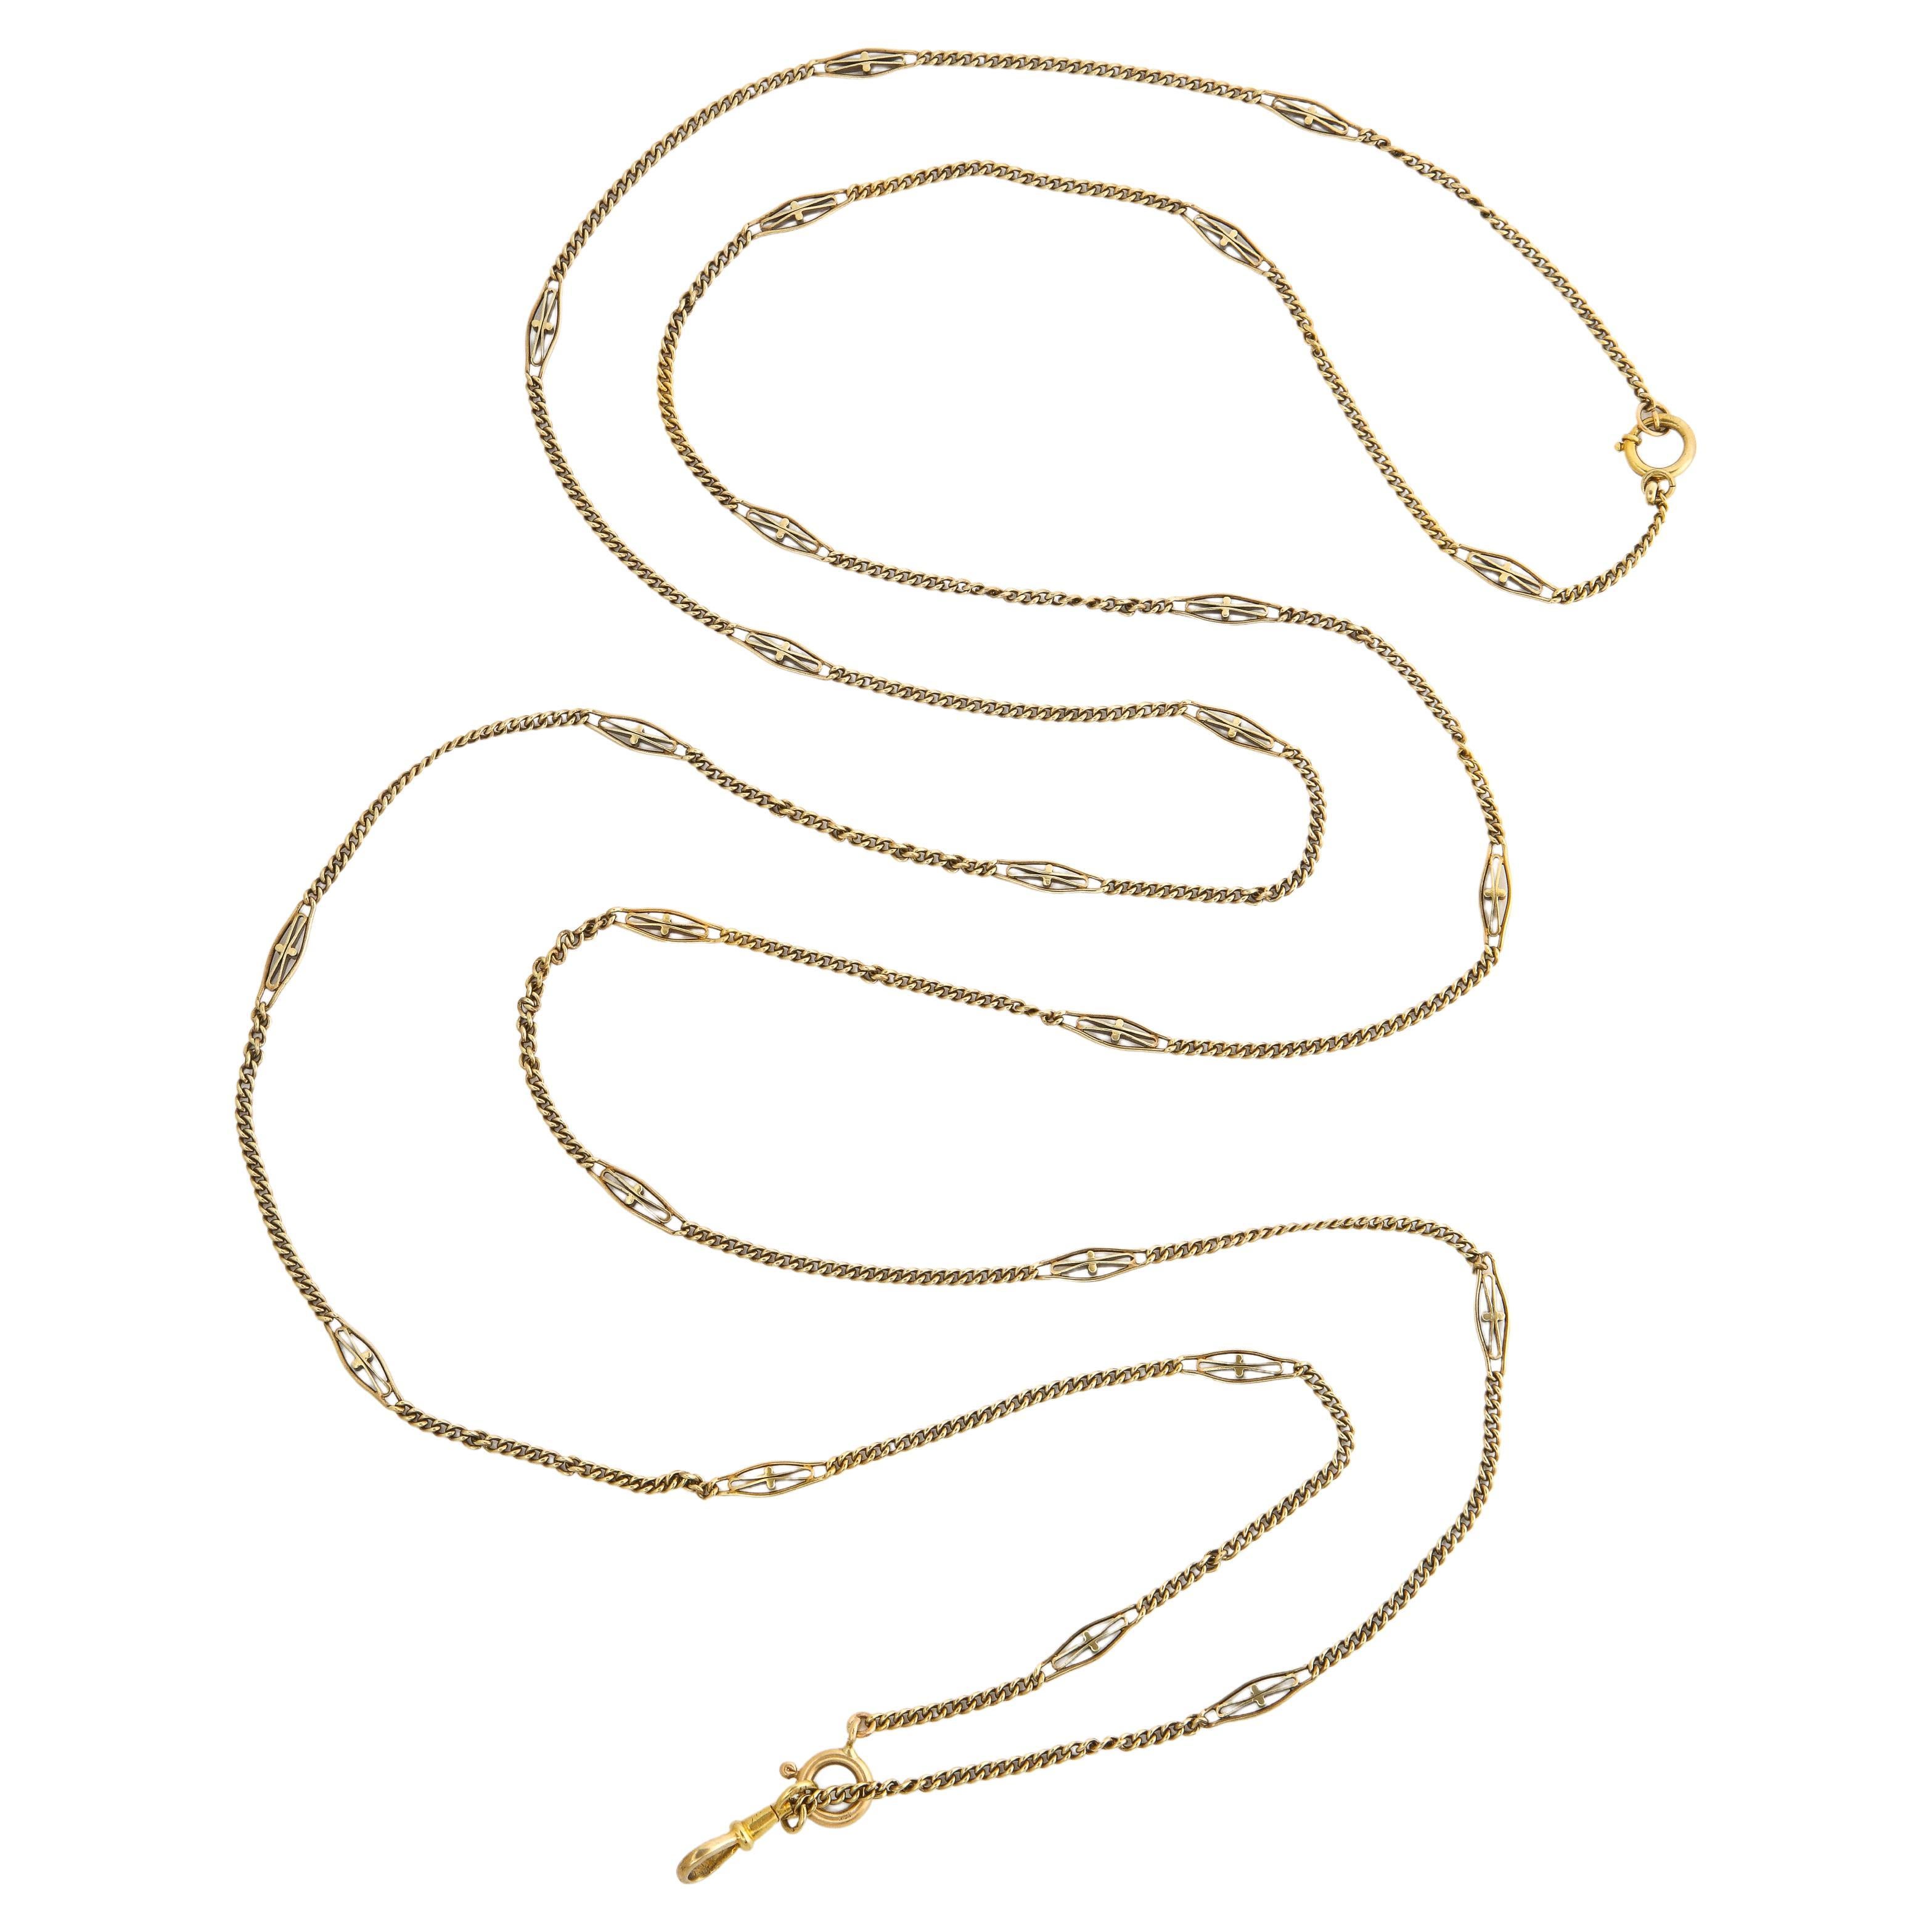 An American made long gold chain that goes on forever or can be divided in two parts. Forever is 65 inches long. intertwined round links are interrupted periodically by oblong links that have a elongated bow shape in their center.. The chain is